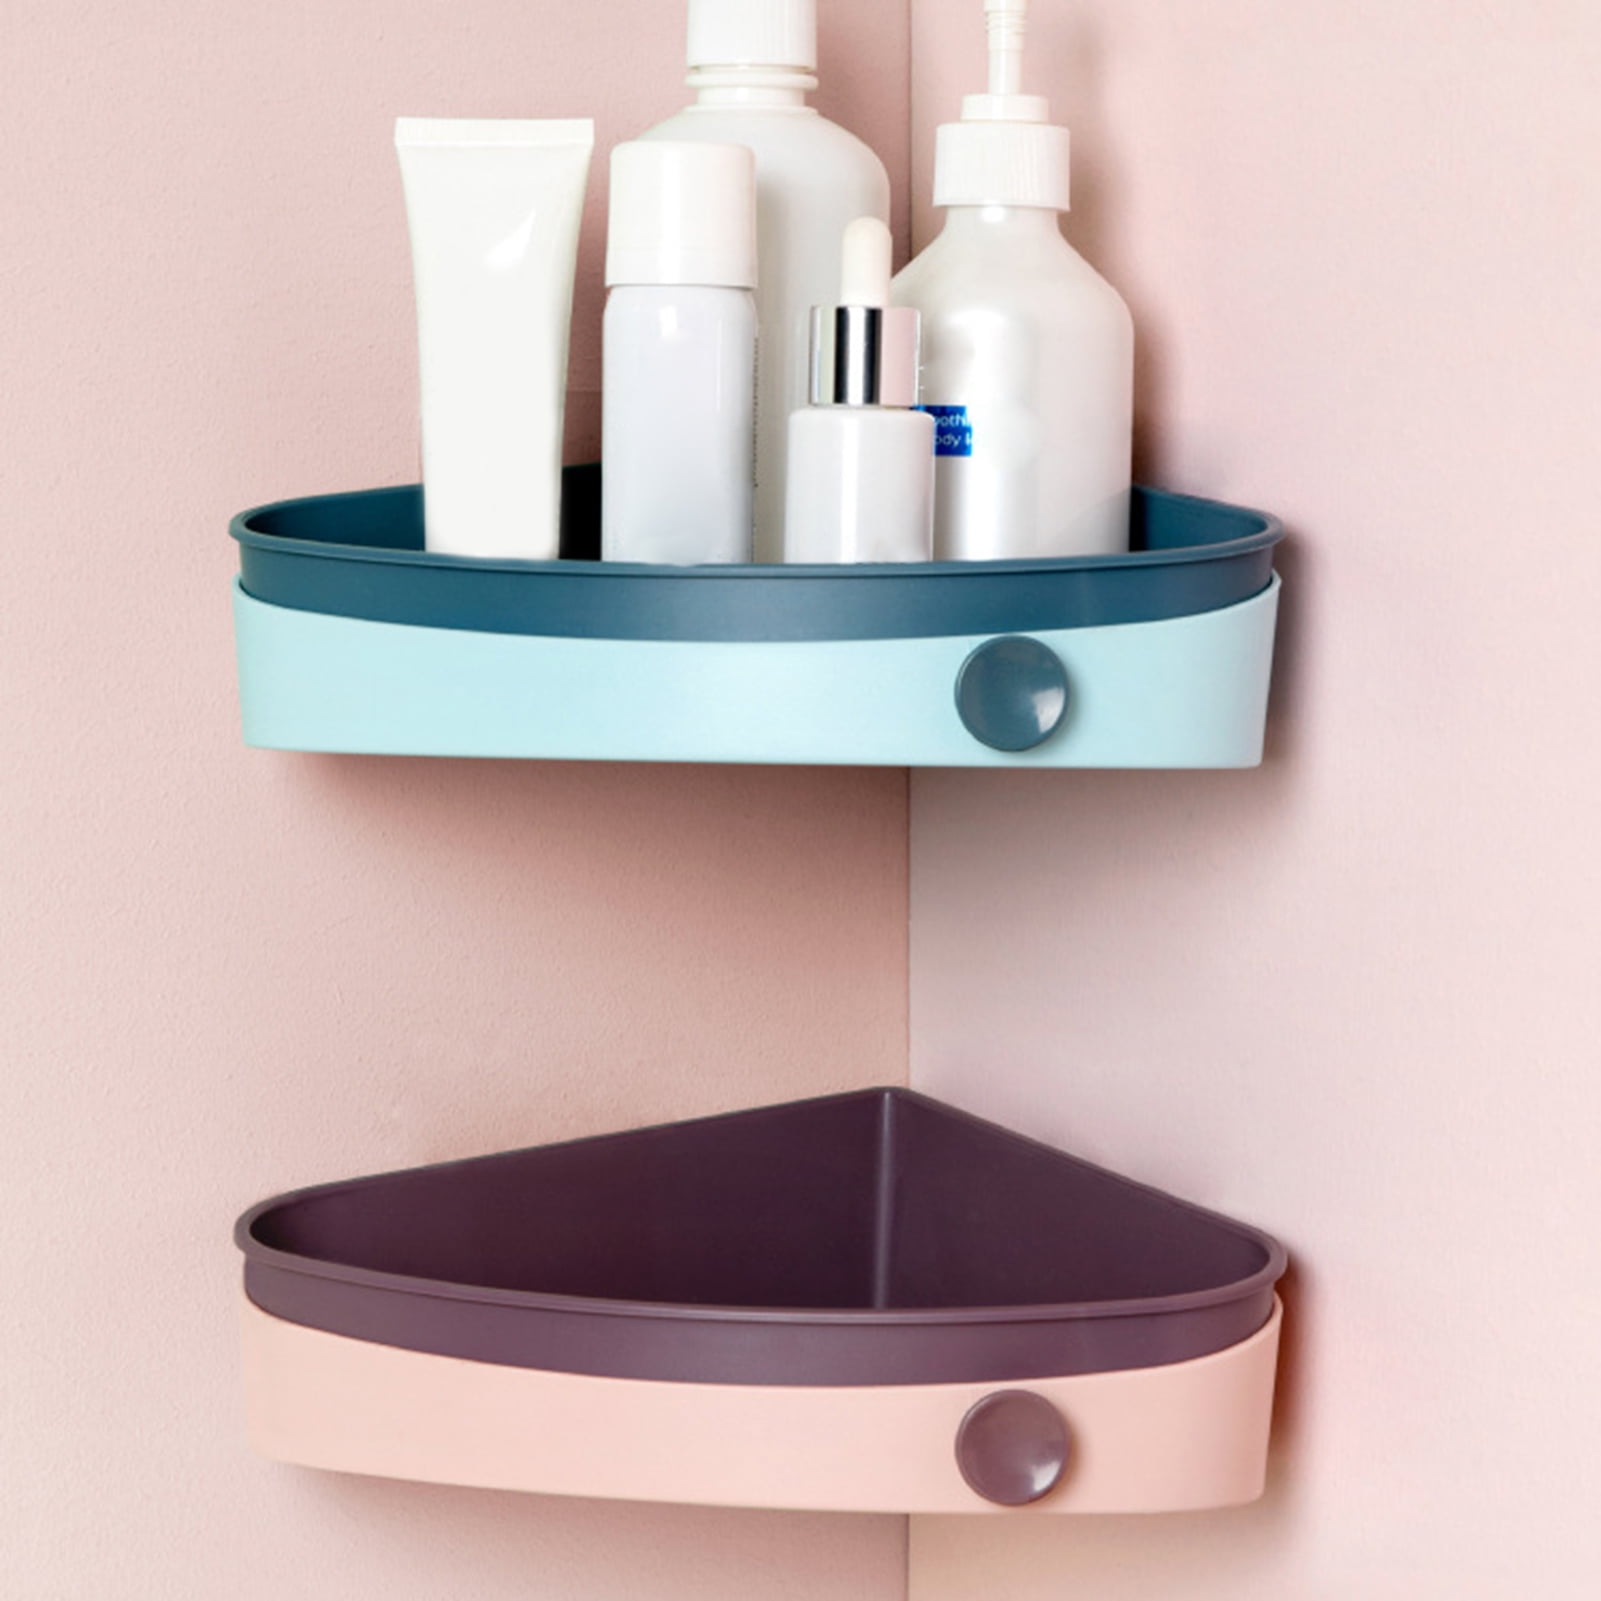 No Drilling Shower Removable Caddy BXIO Wall Mounted Adhesive Bathroom Shelf 